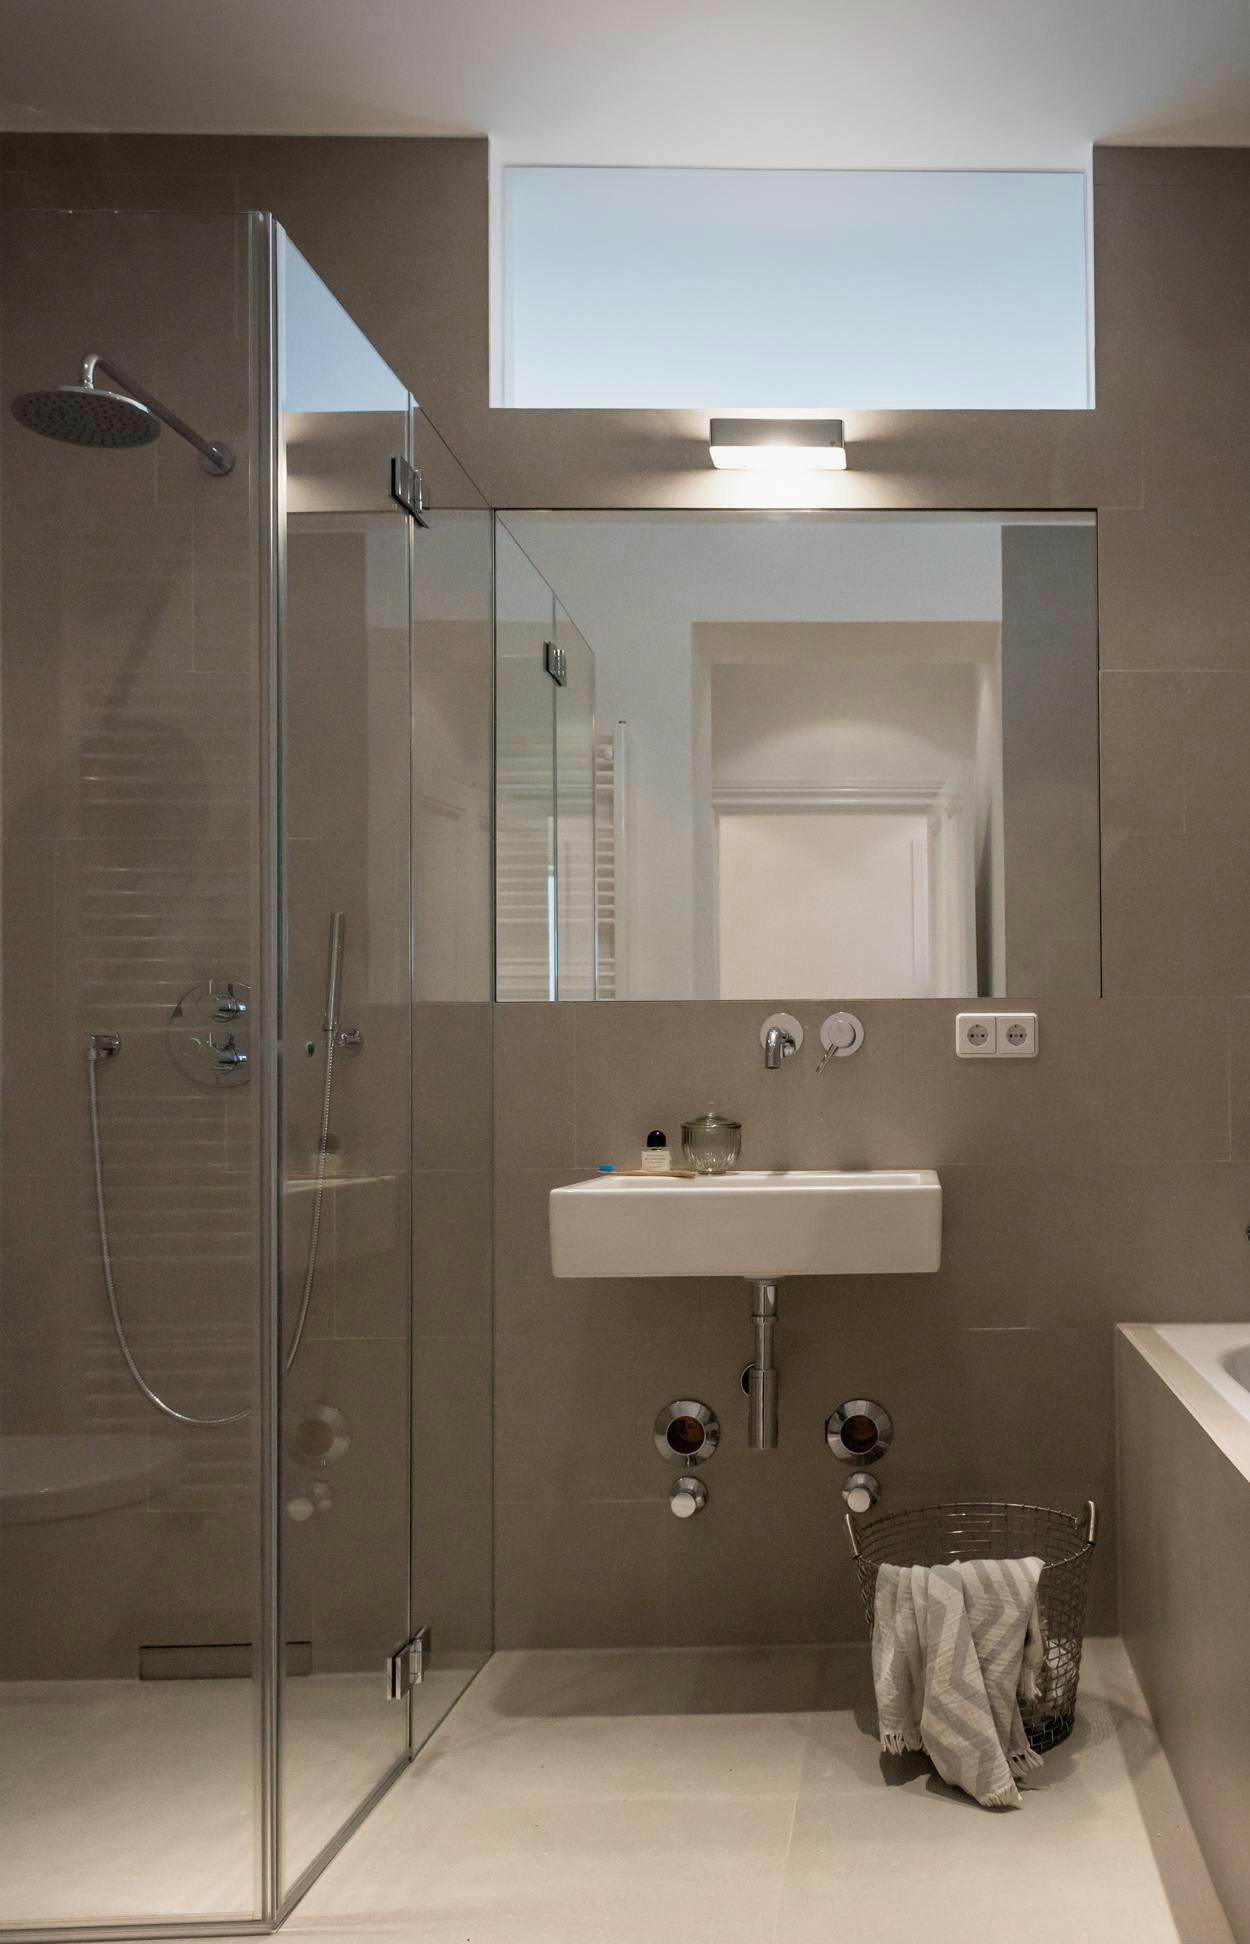 The image features a modern, clean bathroom with a large glass shower stall and a white sink. The shower stall is located next to the sink, and the sink is placed on a countertop. The bathroom appears to be well-lit, with a window providing natural light.

In addition to the sink and shower stall, there are two bottles placed near the sink, possibly containing toiletries or cleaning supplies. A towel is also visible on the countertop, likely for drying after using the bathroom.